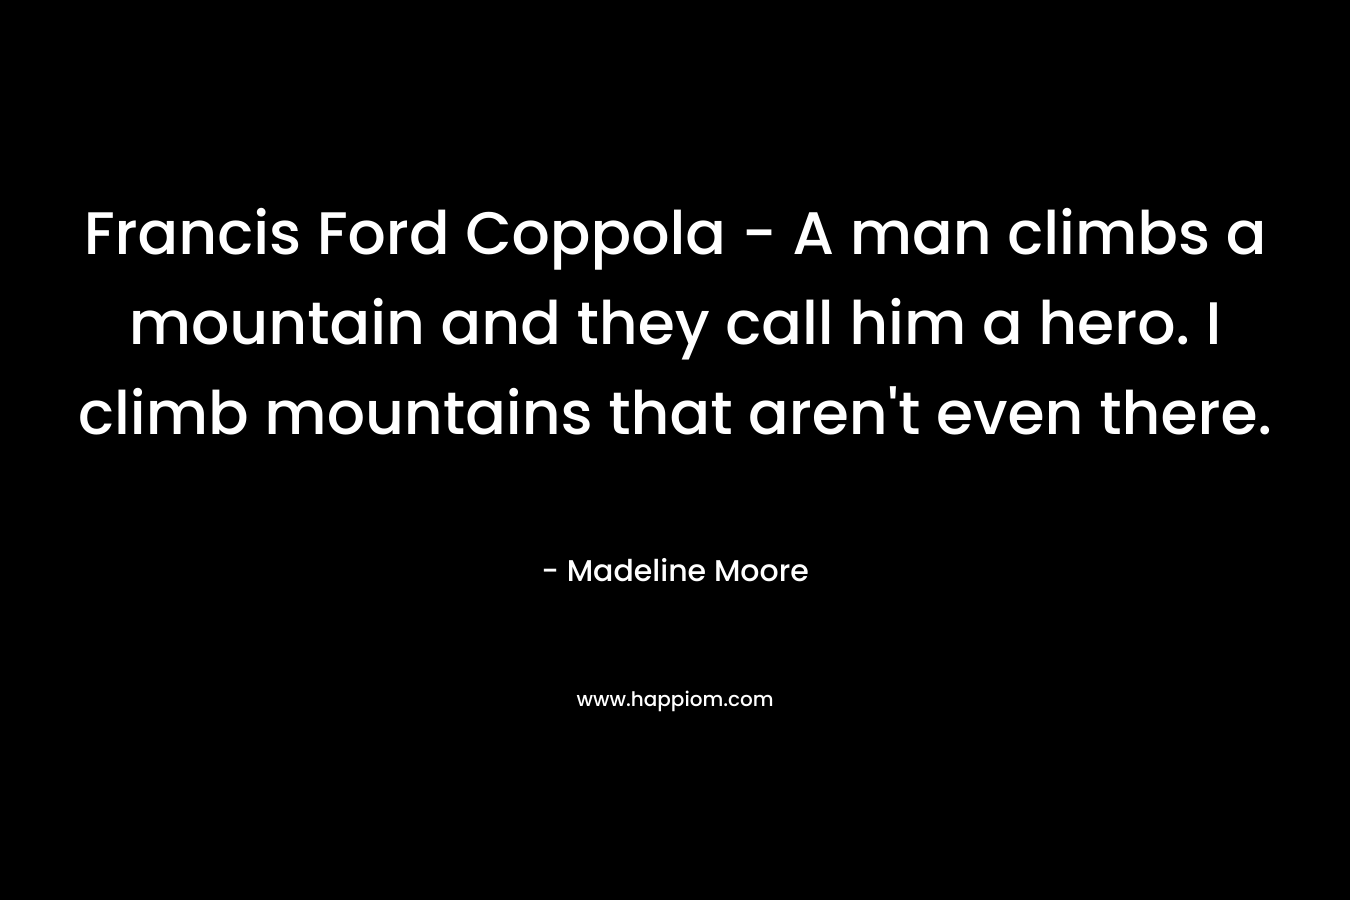 Francis Ford Coppola – A man climbs a mountain and they call him a hero. I climb mountains that aren’t even there. – Madeline Moore